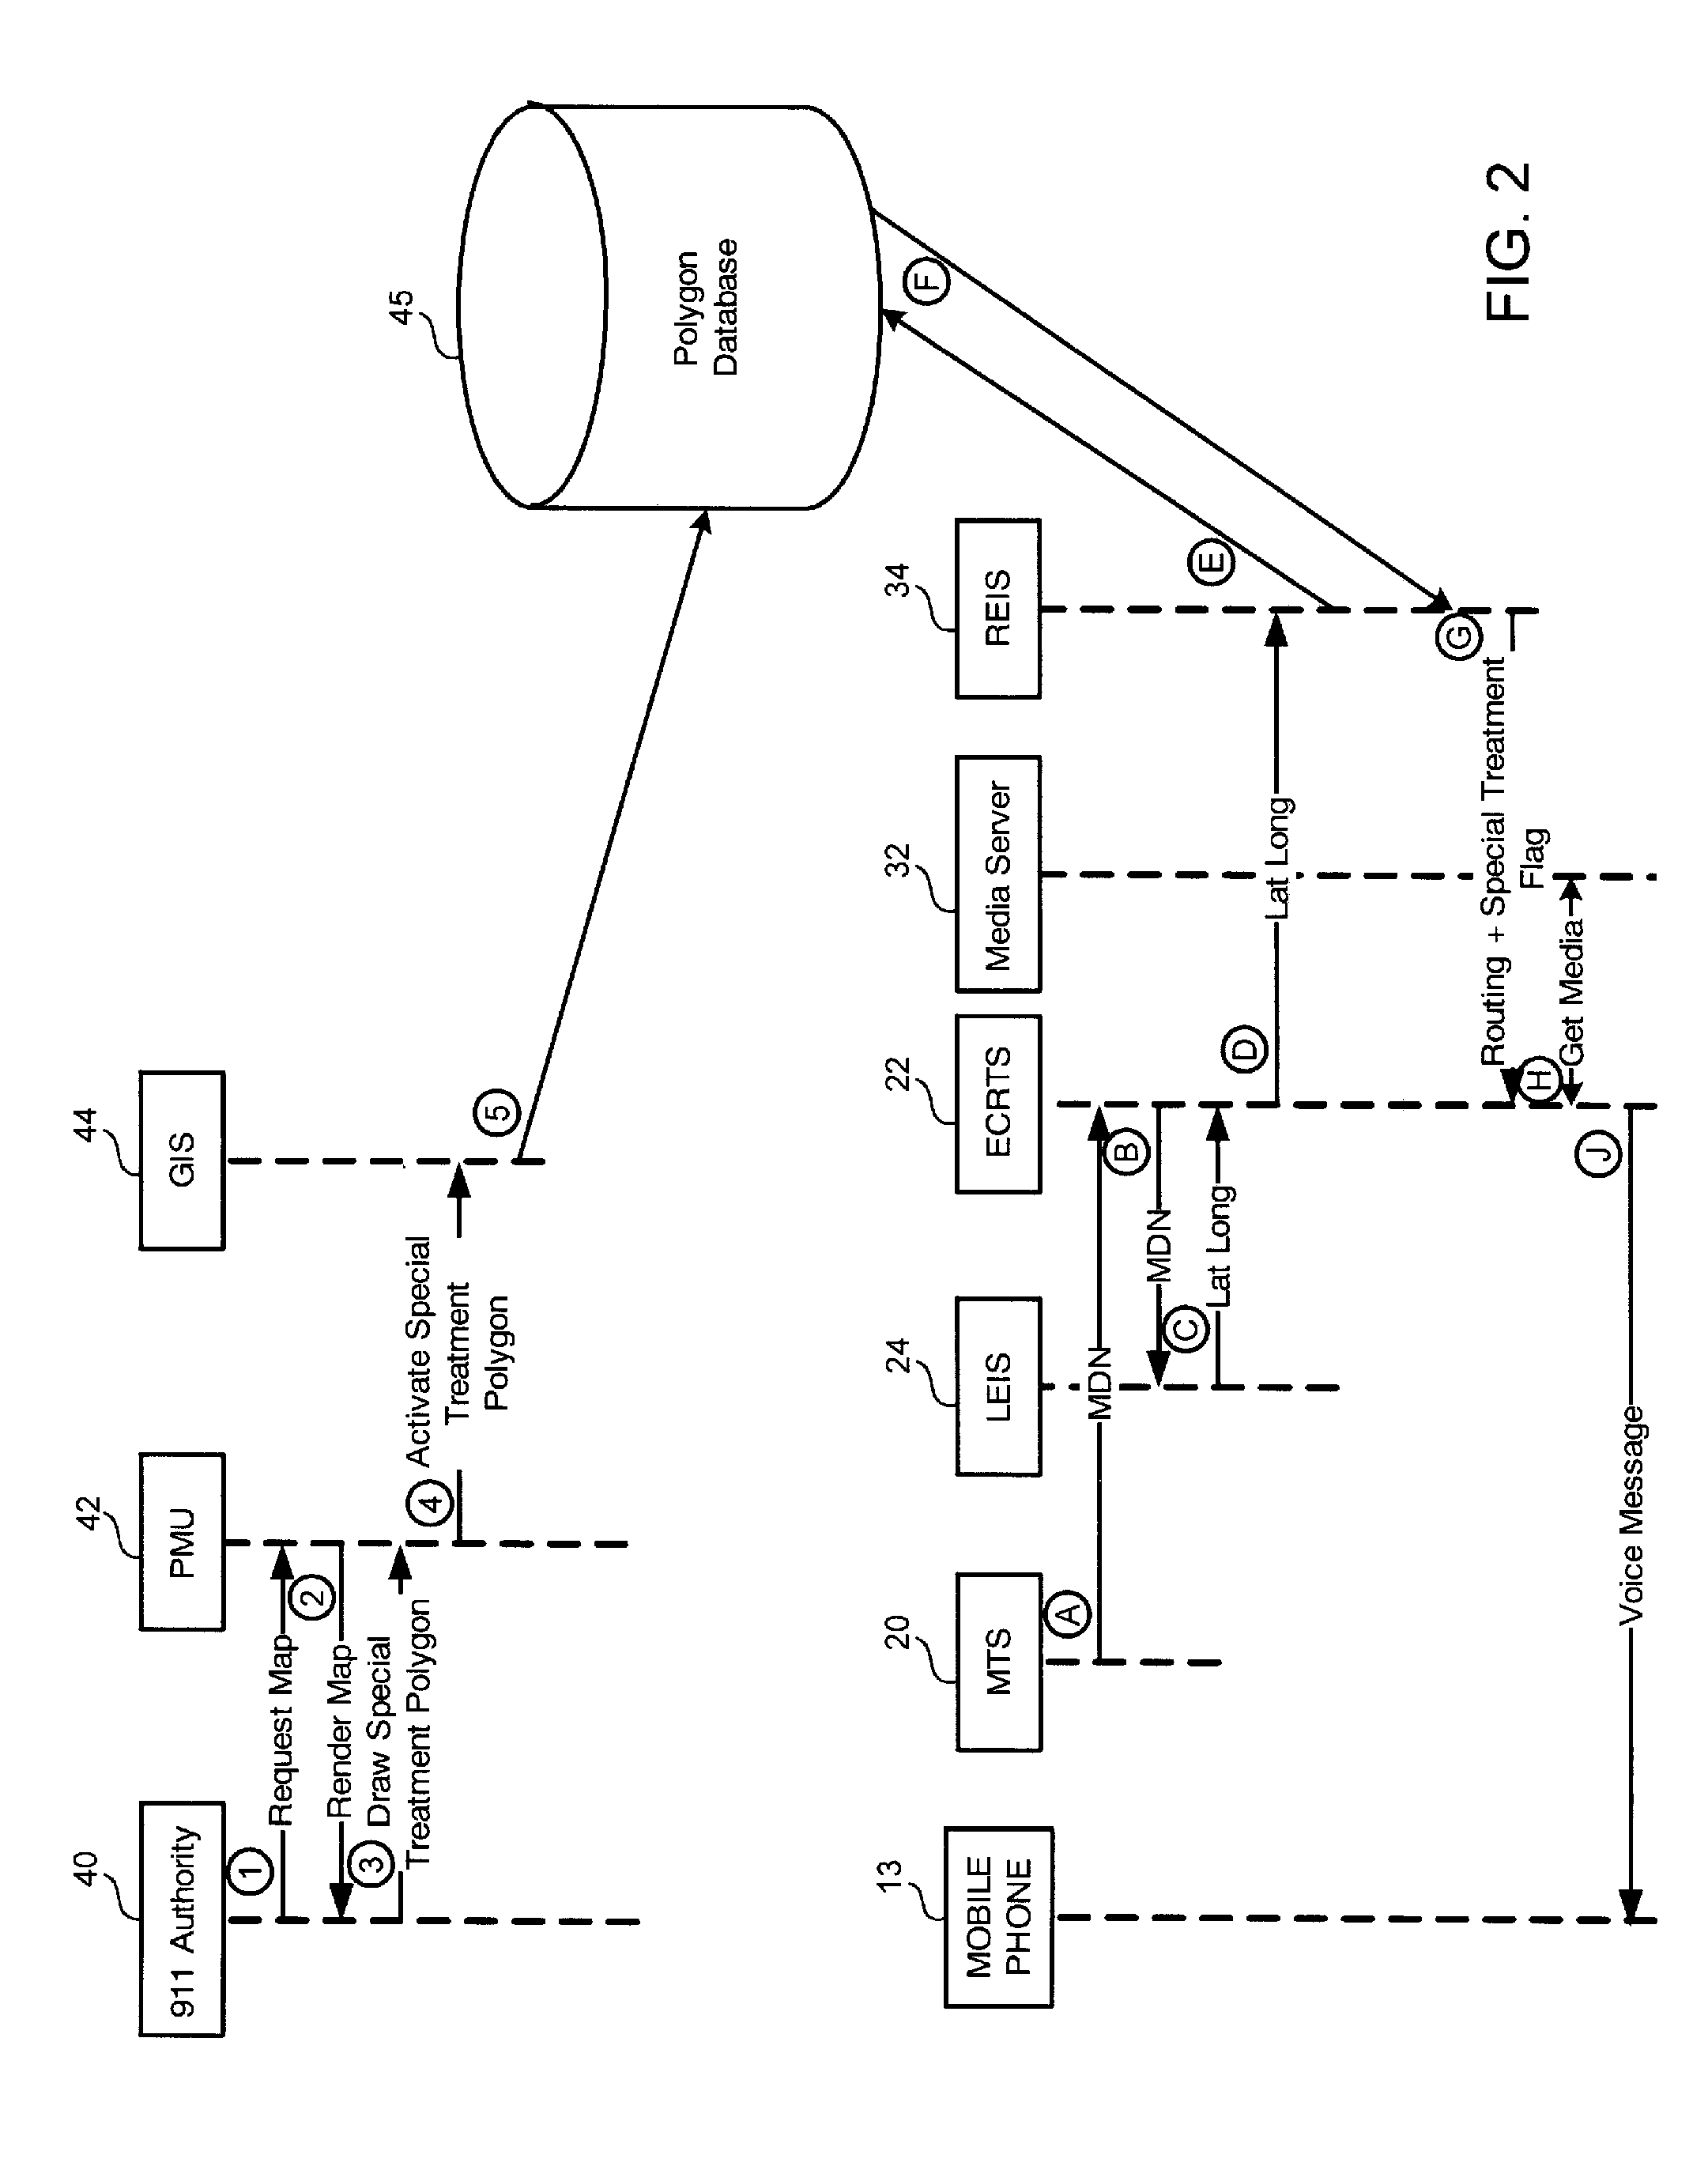 System and method for effecting special treatment of emergency service calls originating in a temporarily designated region